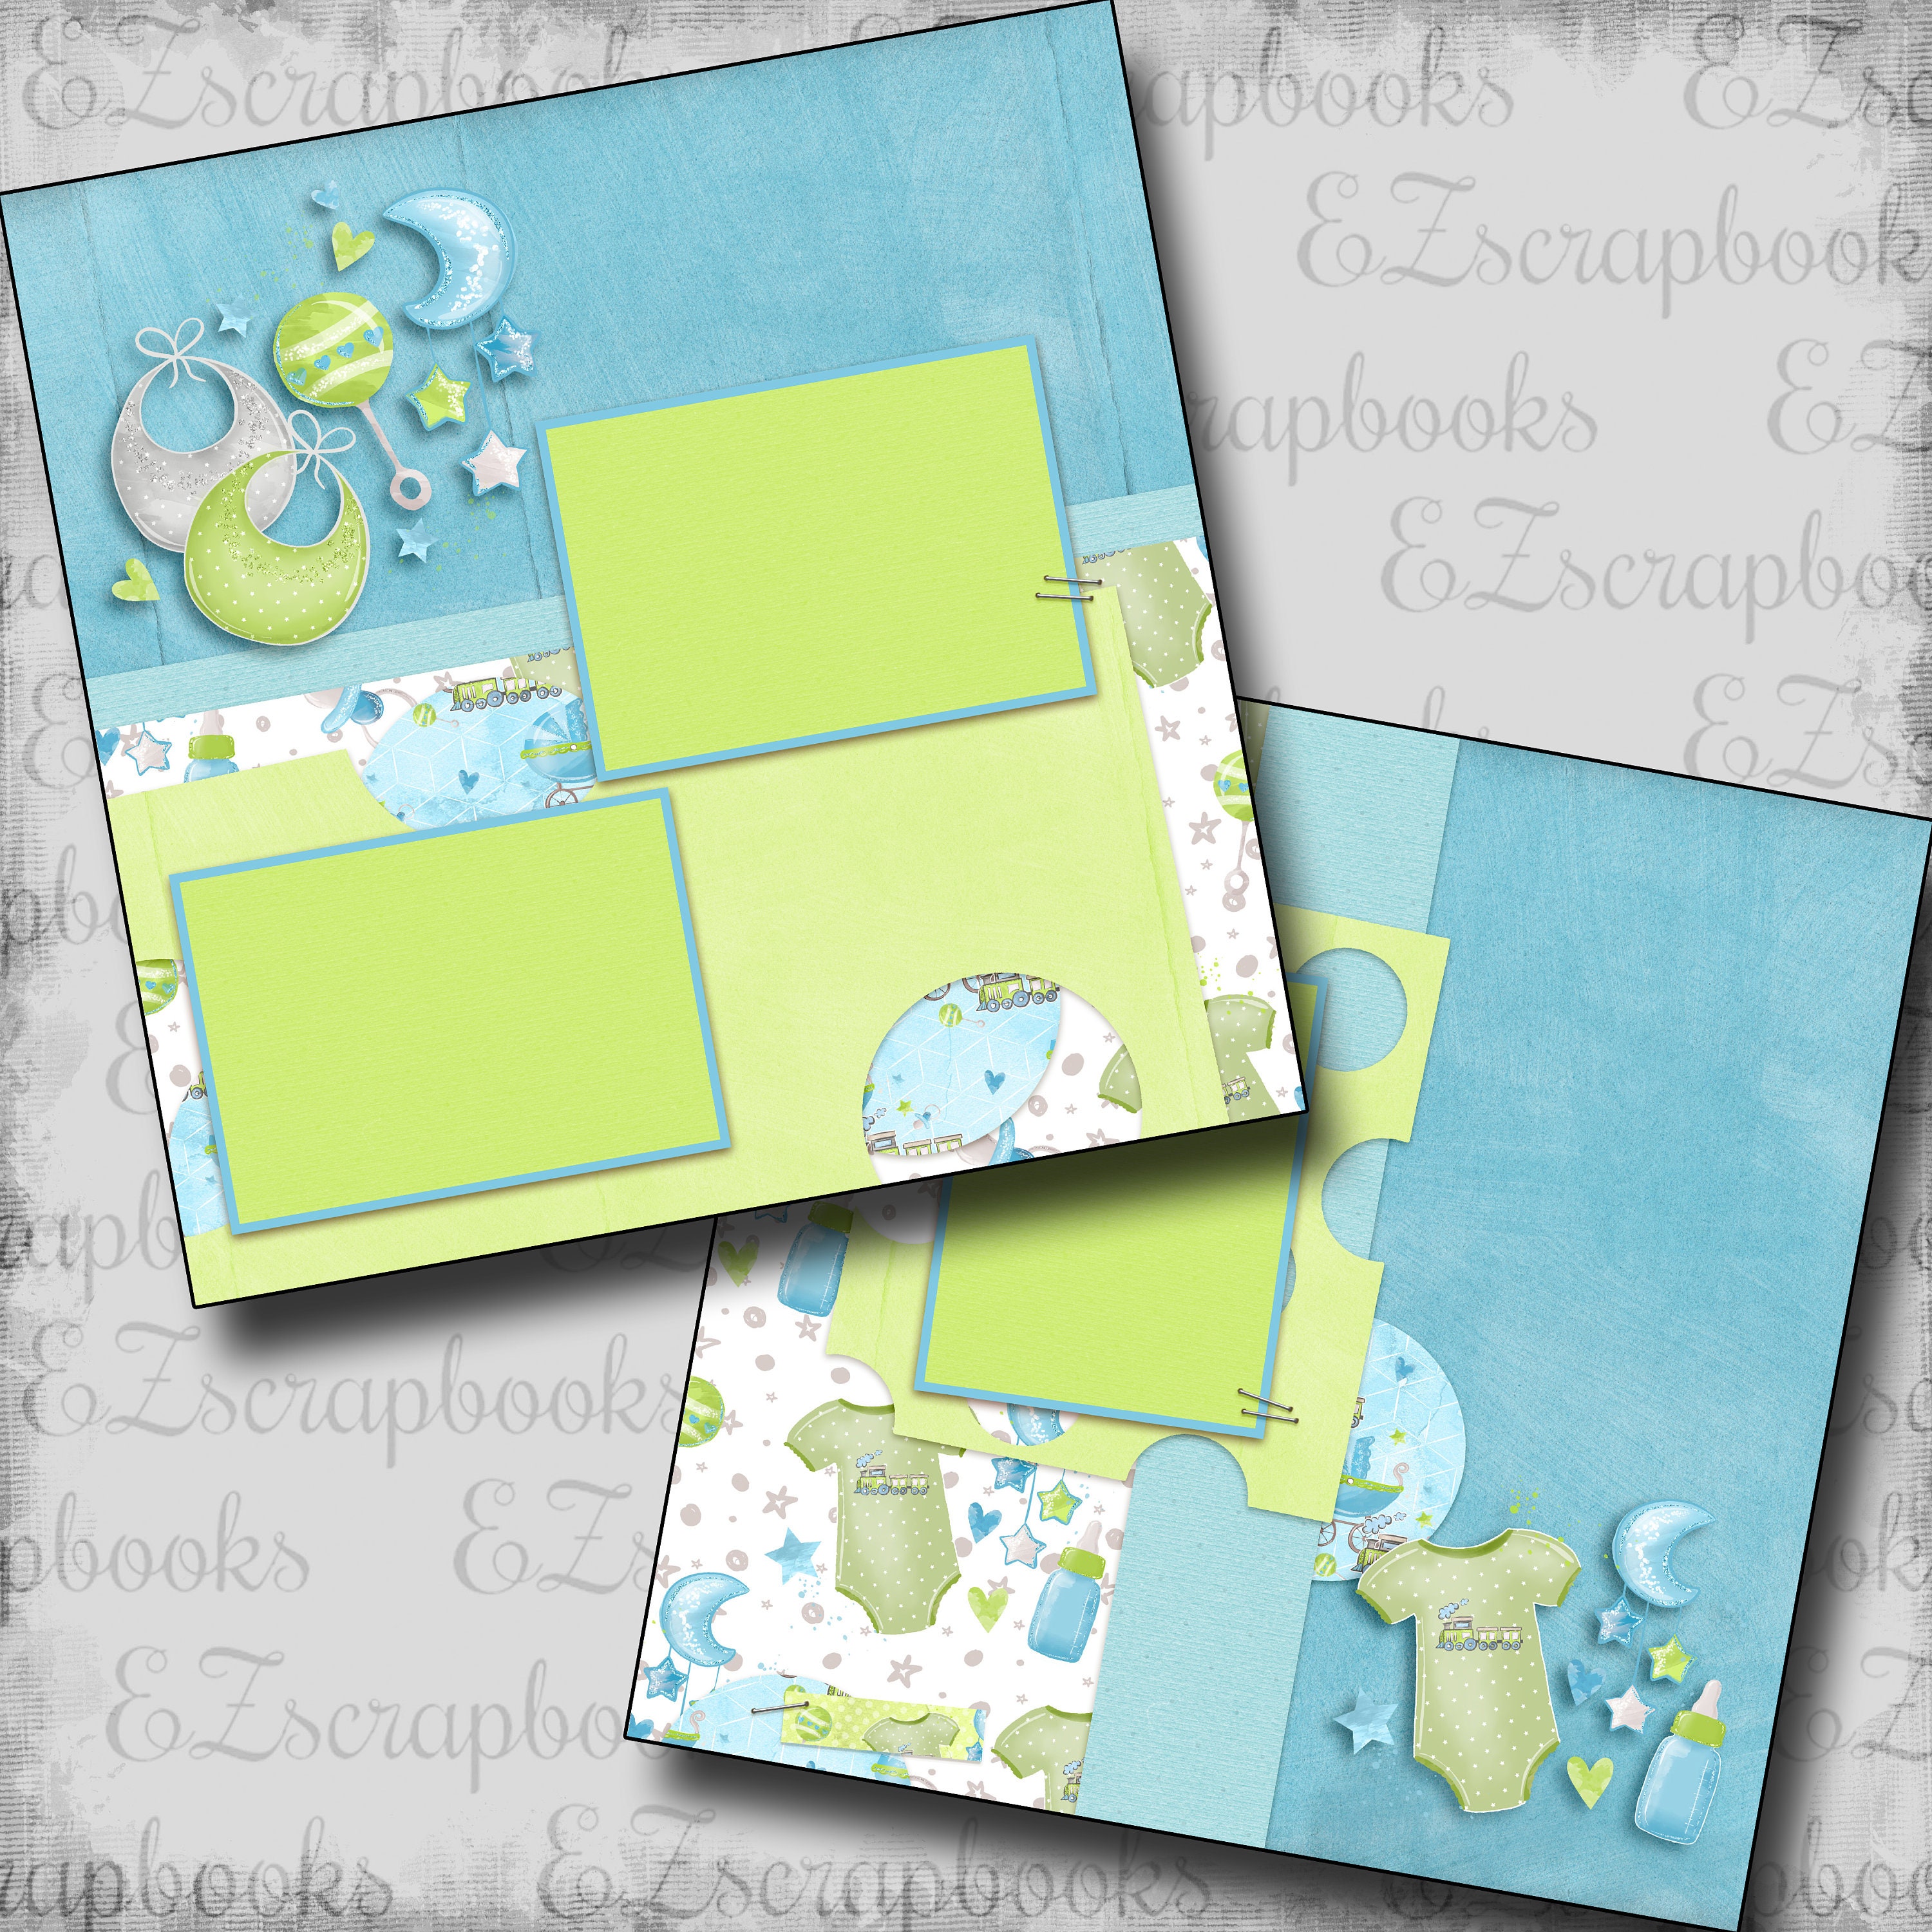 Reminisce (REMBC) Oh Baby Boy Scrapbook Collection Kit, Multicolor